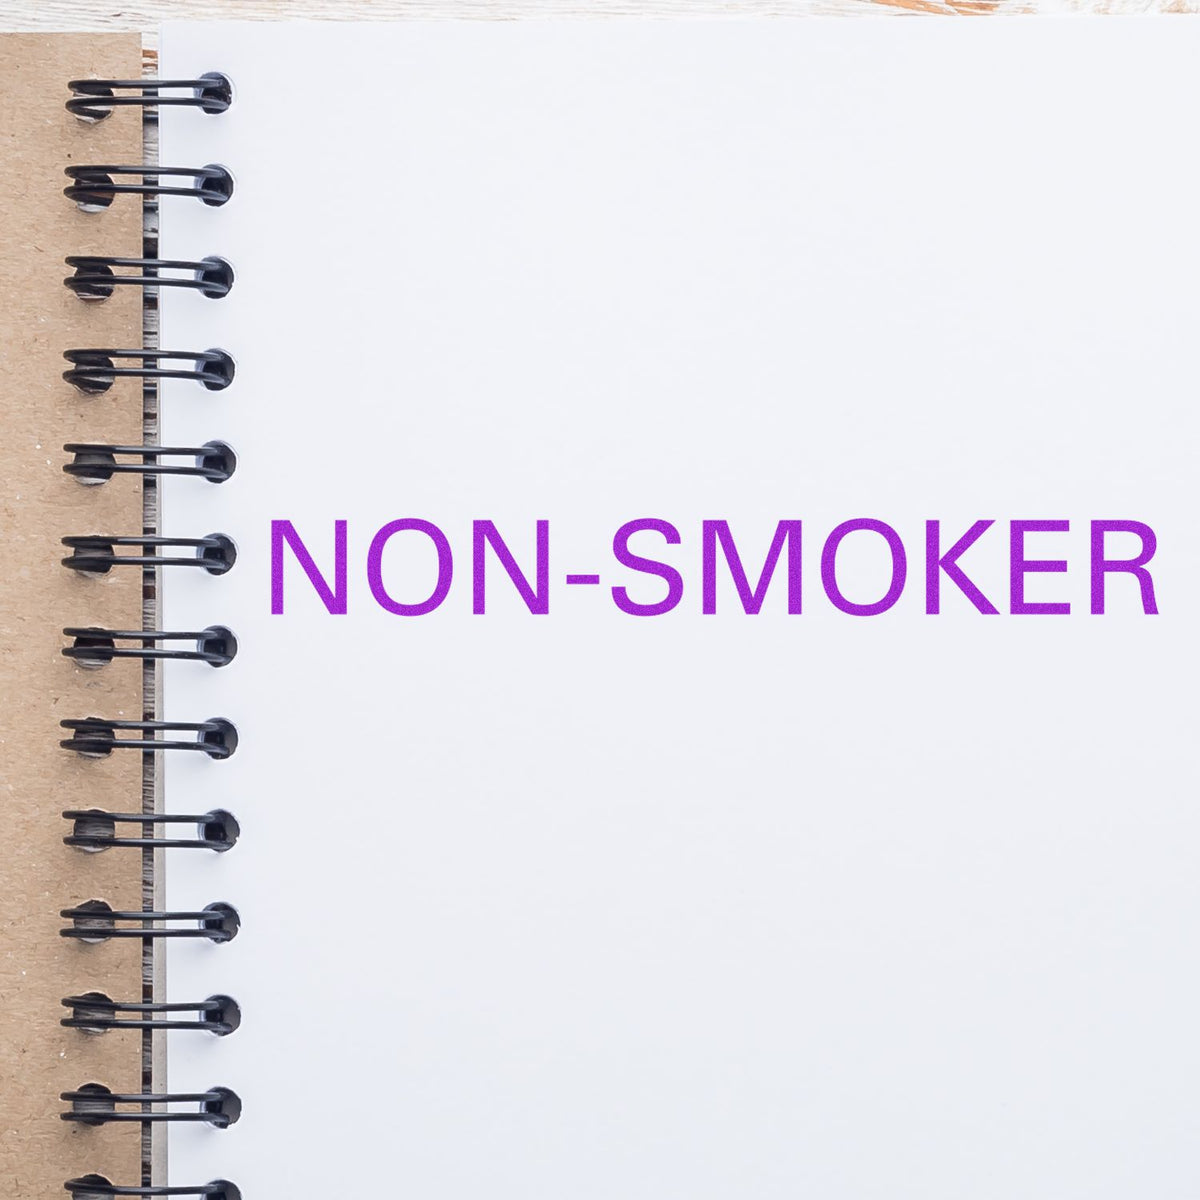 Large Non-Smoker Rubber Stamp In Use